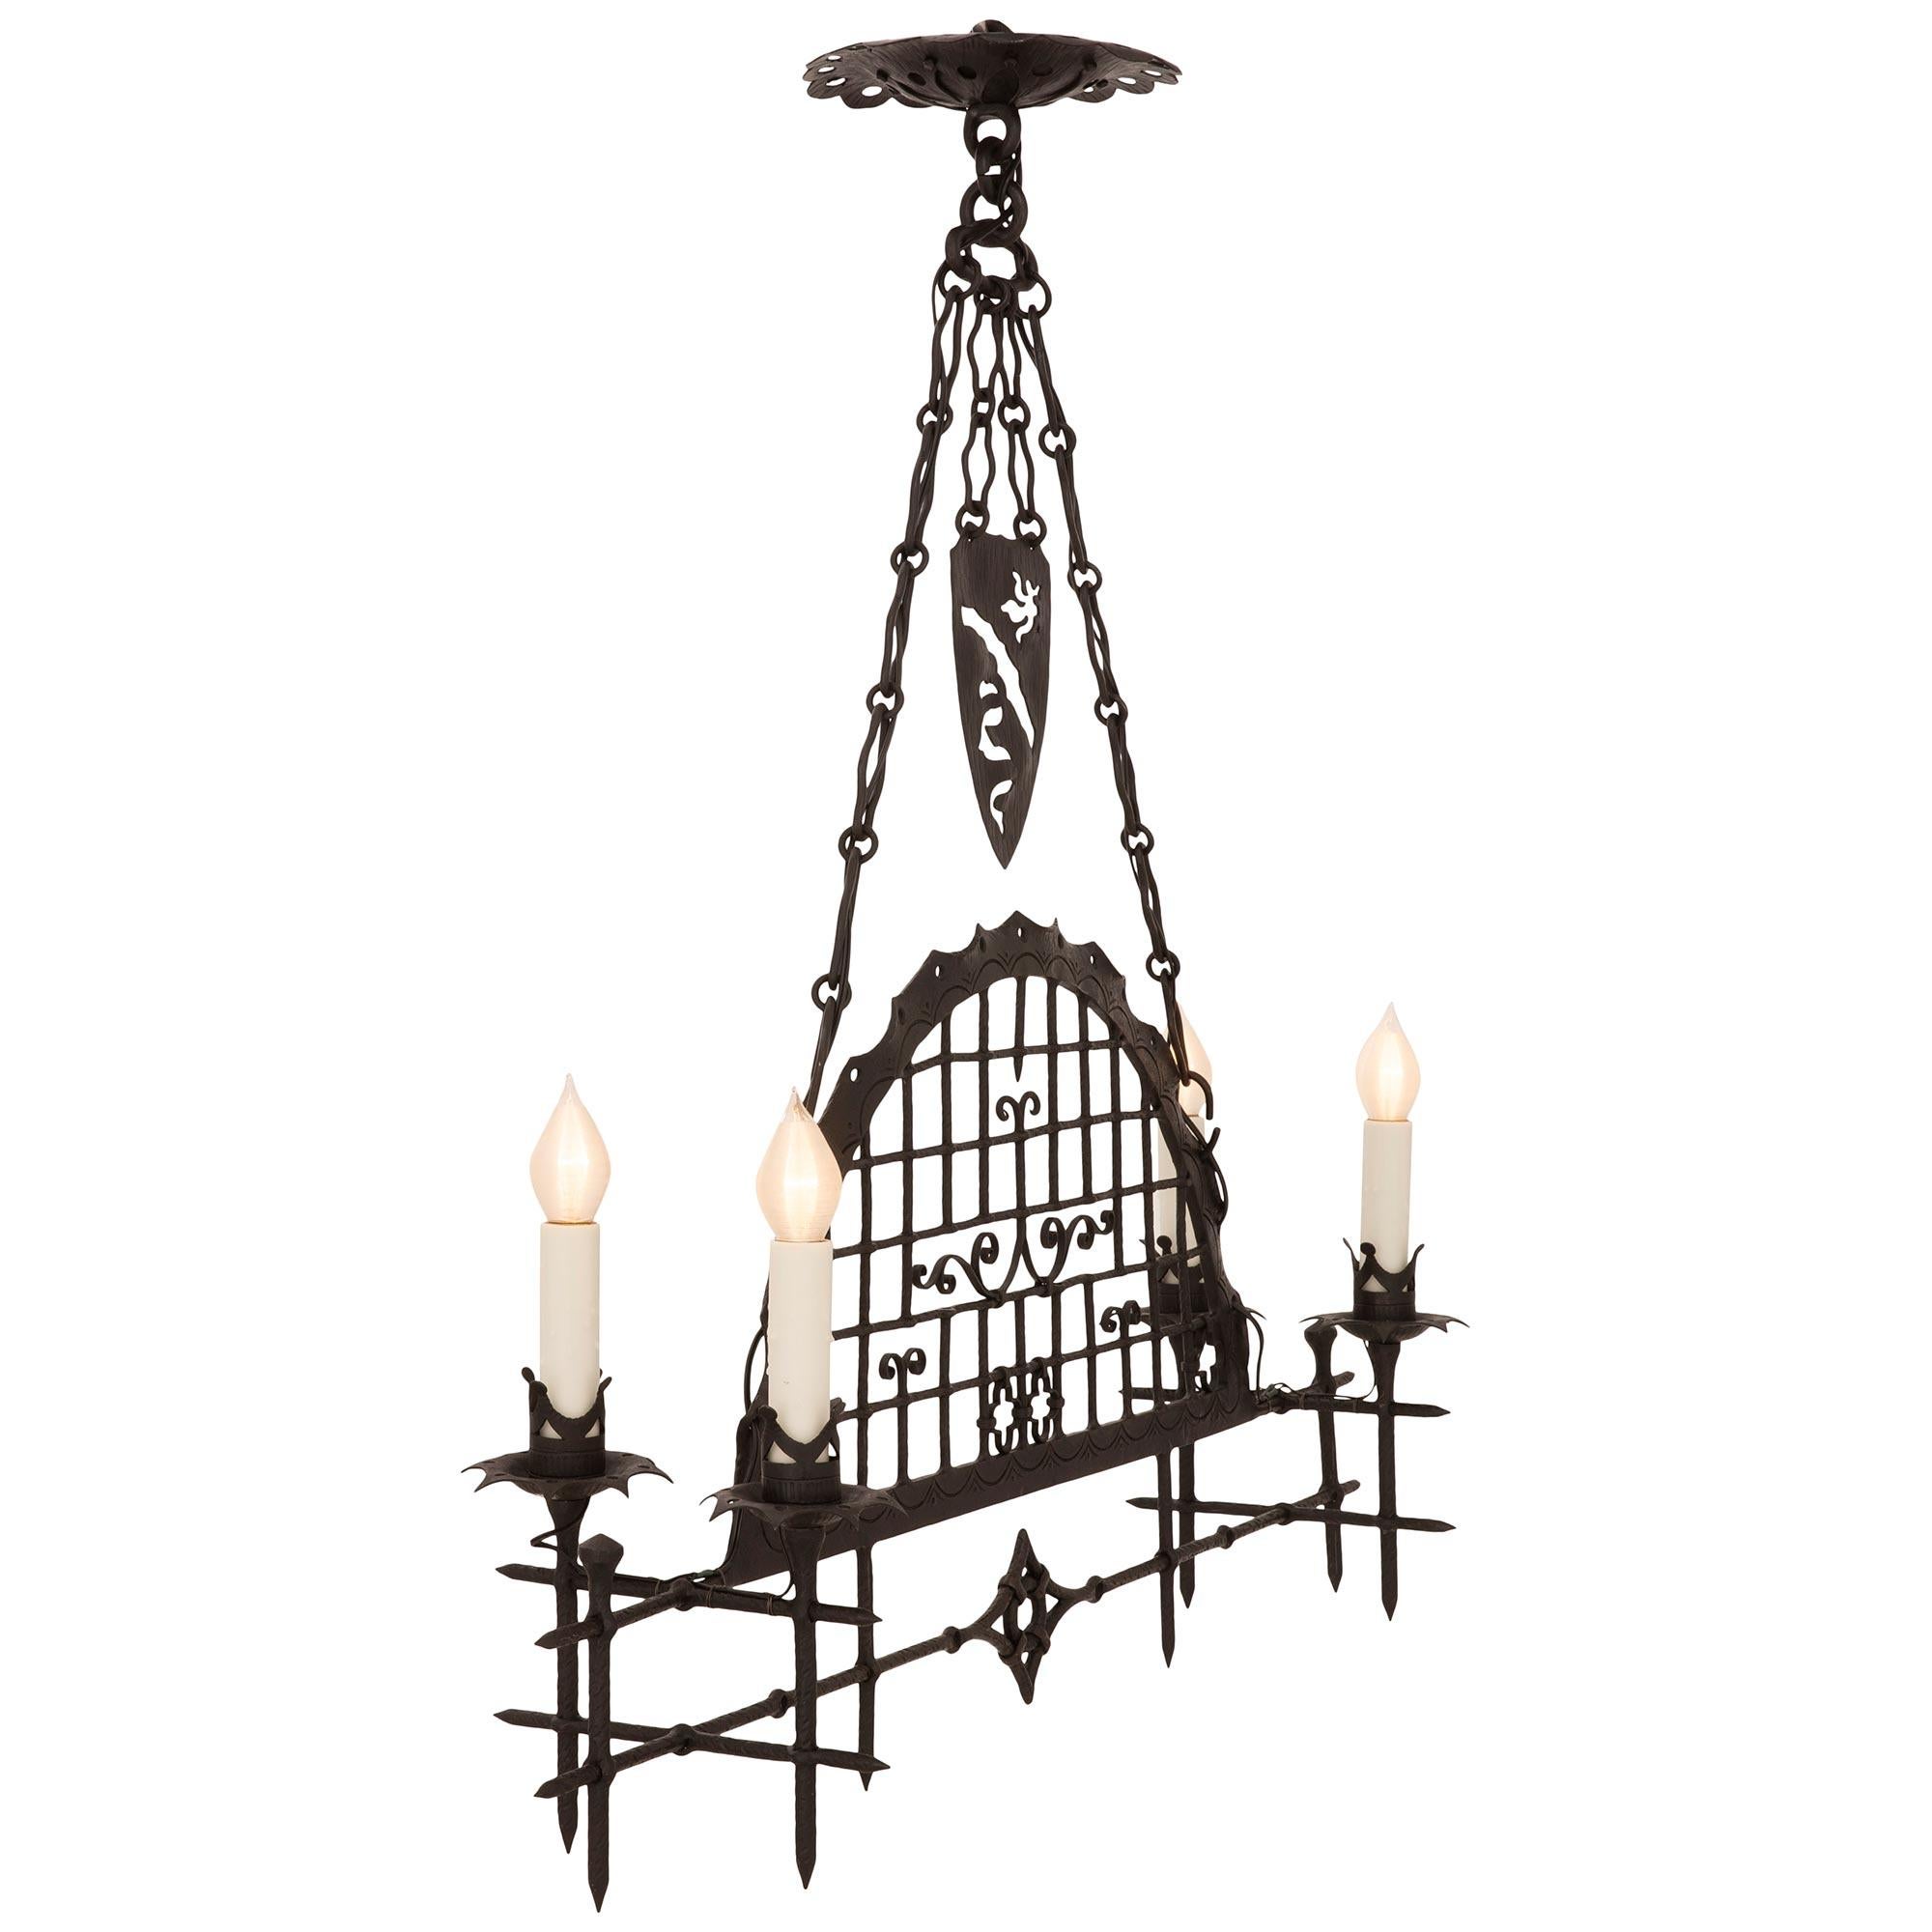 A striking and very unique Italian 19th century Renaissance st. wrought iron chandelier. The four arm chandelier displays eight impressive spikes with a beautiful pierced central curved diamond like and circular central reserve. The arched center